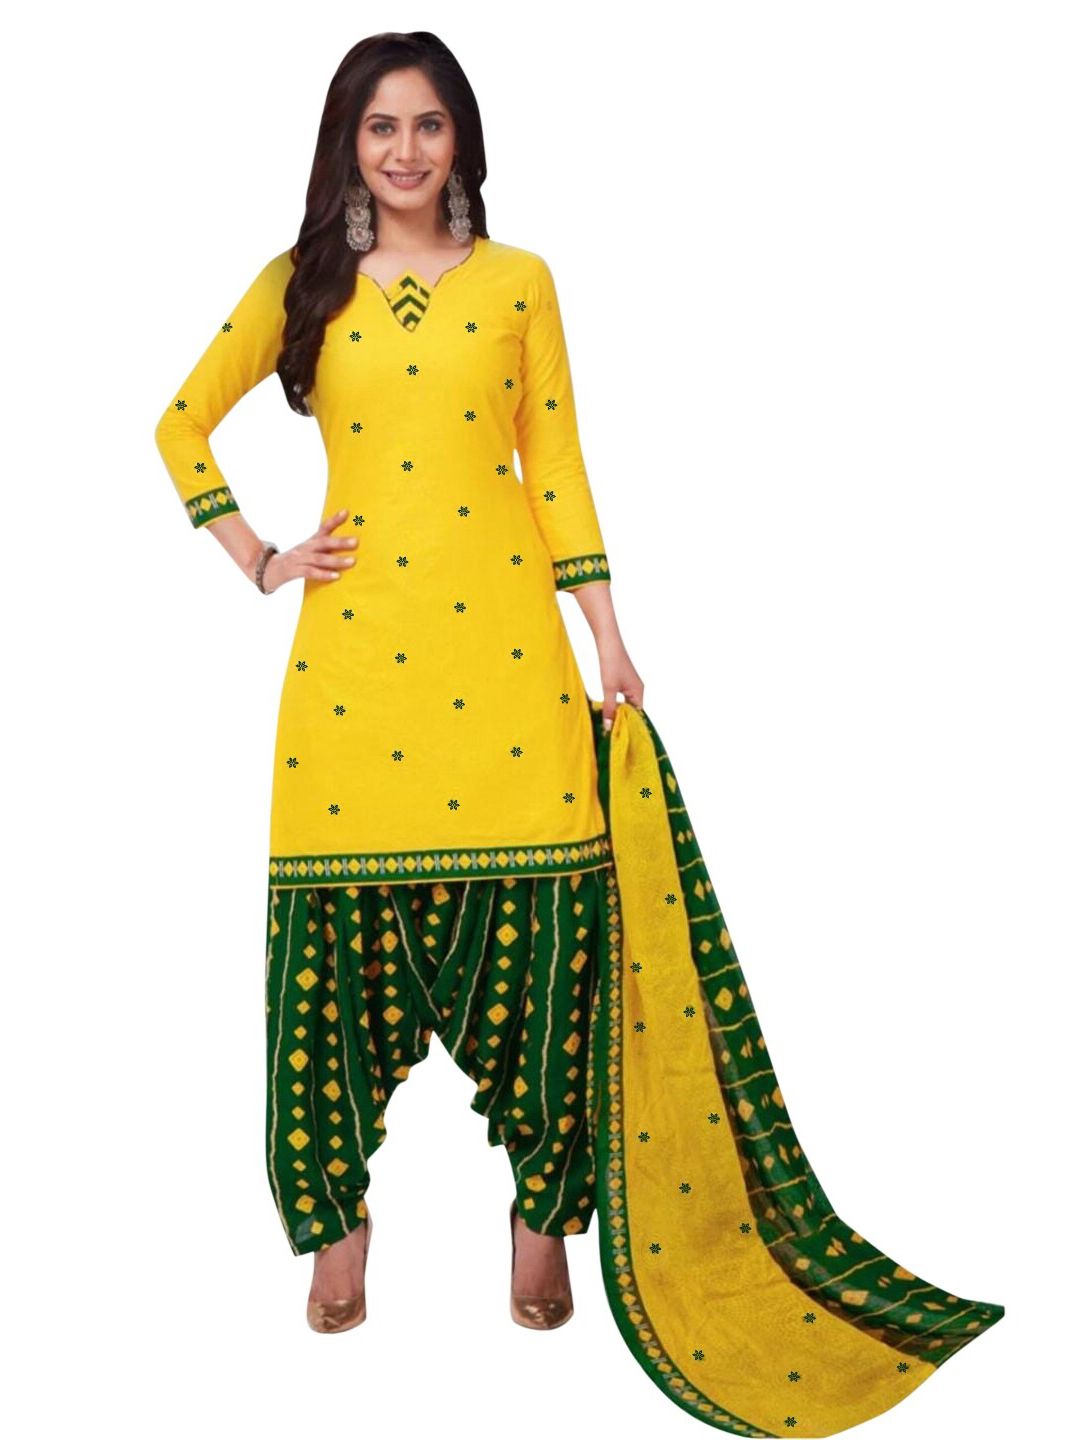 INDIAN HERITAGE Yellow & Green Printed Silk Crepe Unstitched Dress Material Price in India